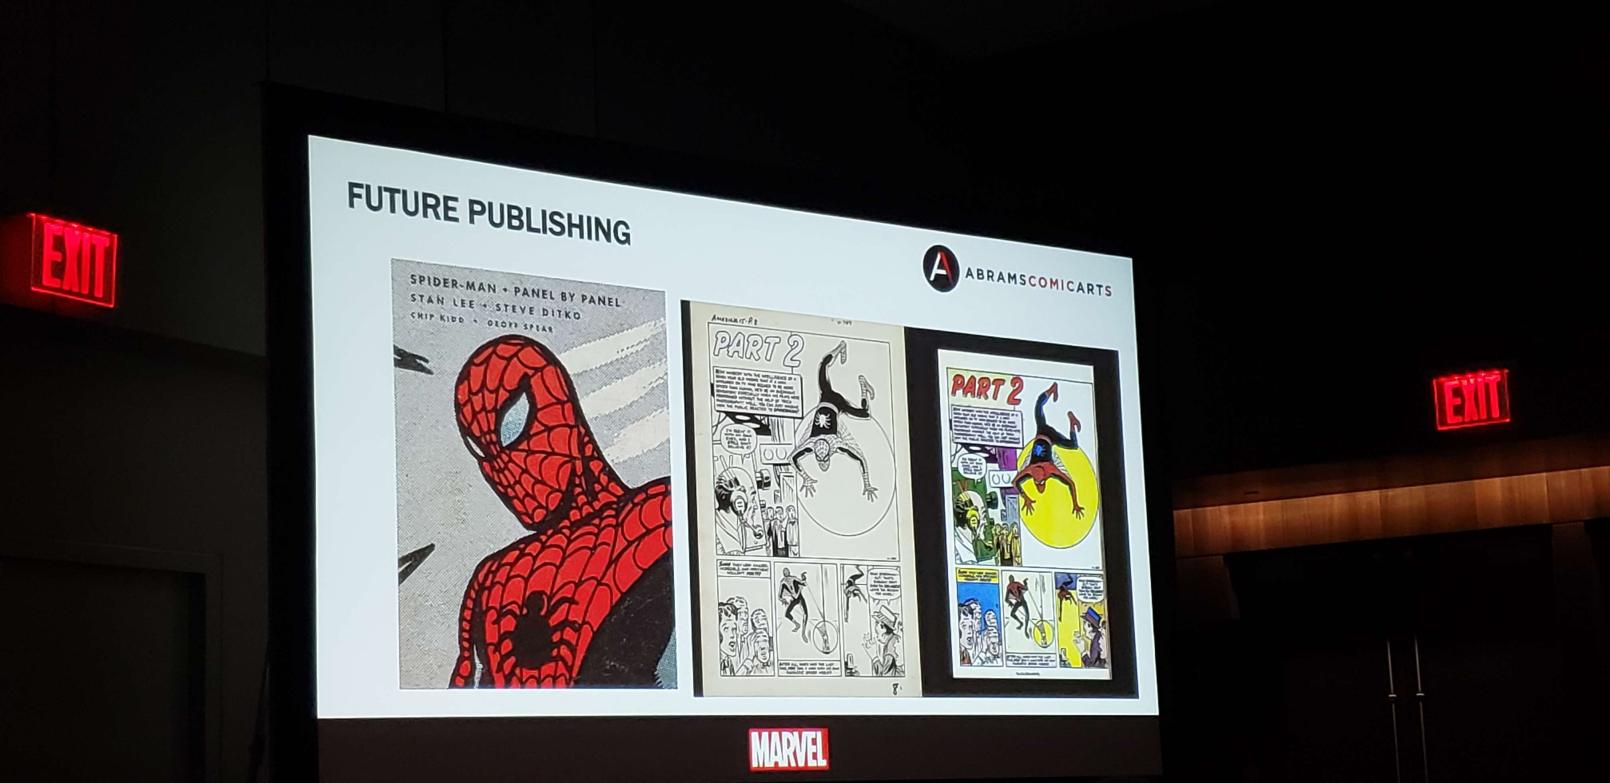 NYCC 2022: Marvel announces new books from IDW, Abrams ComicArts, and more!